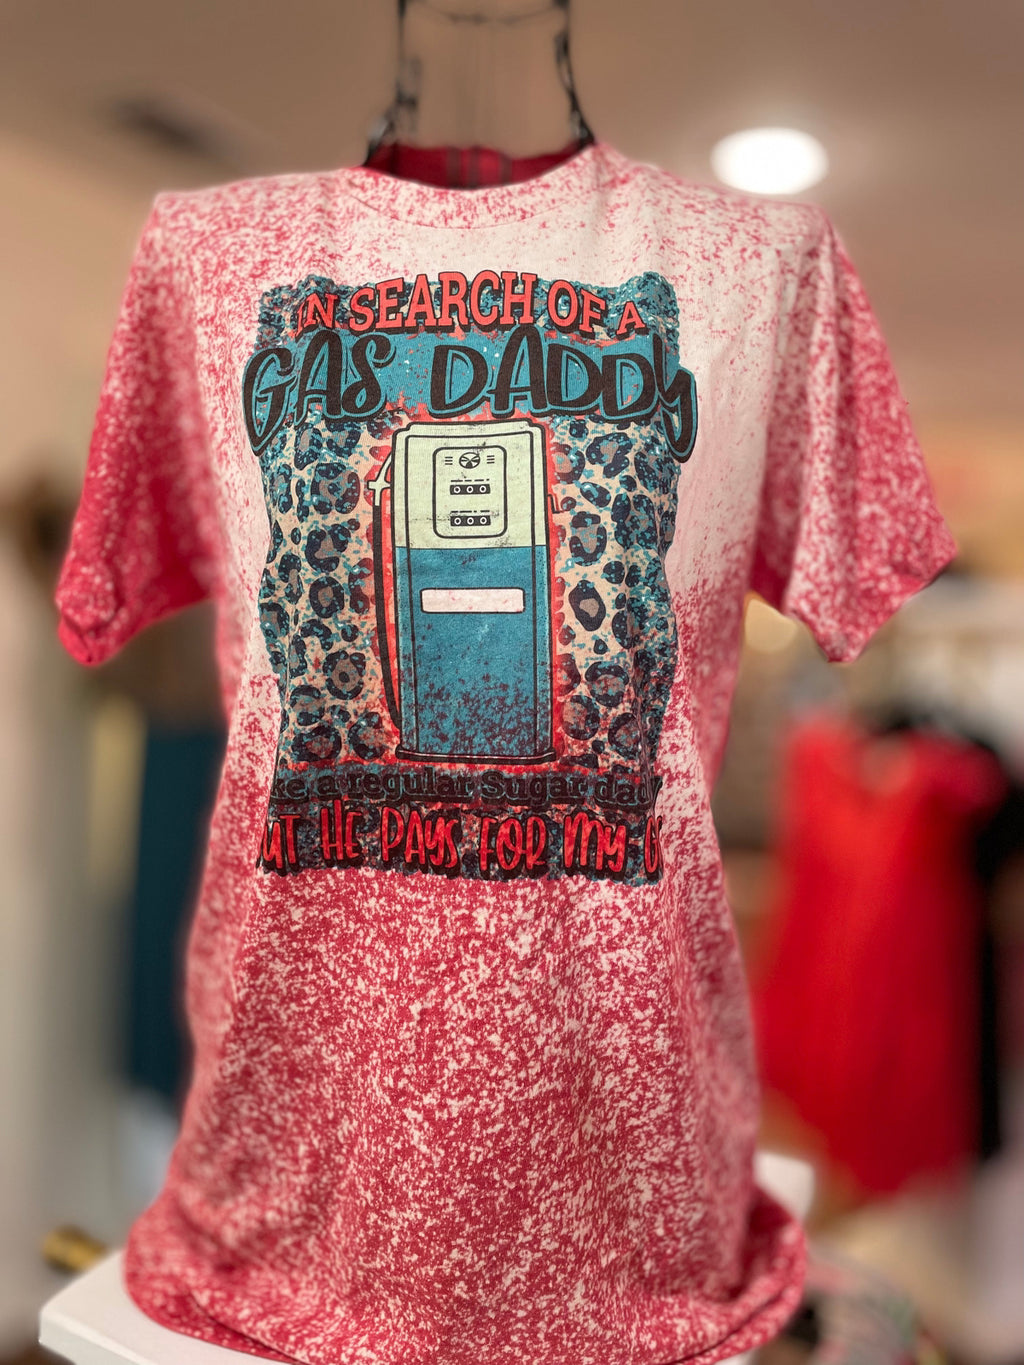 In Search Of A Gas Daddy Tee